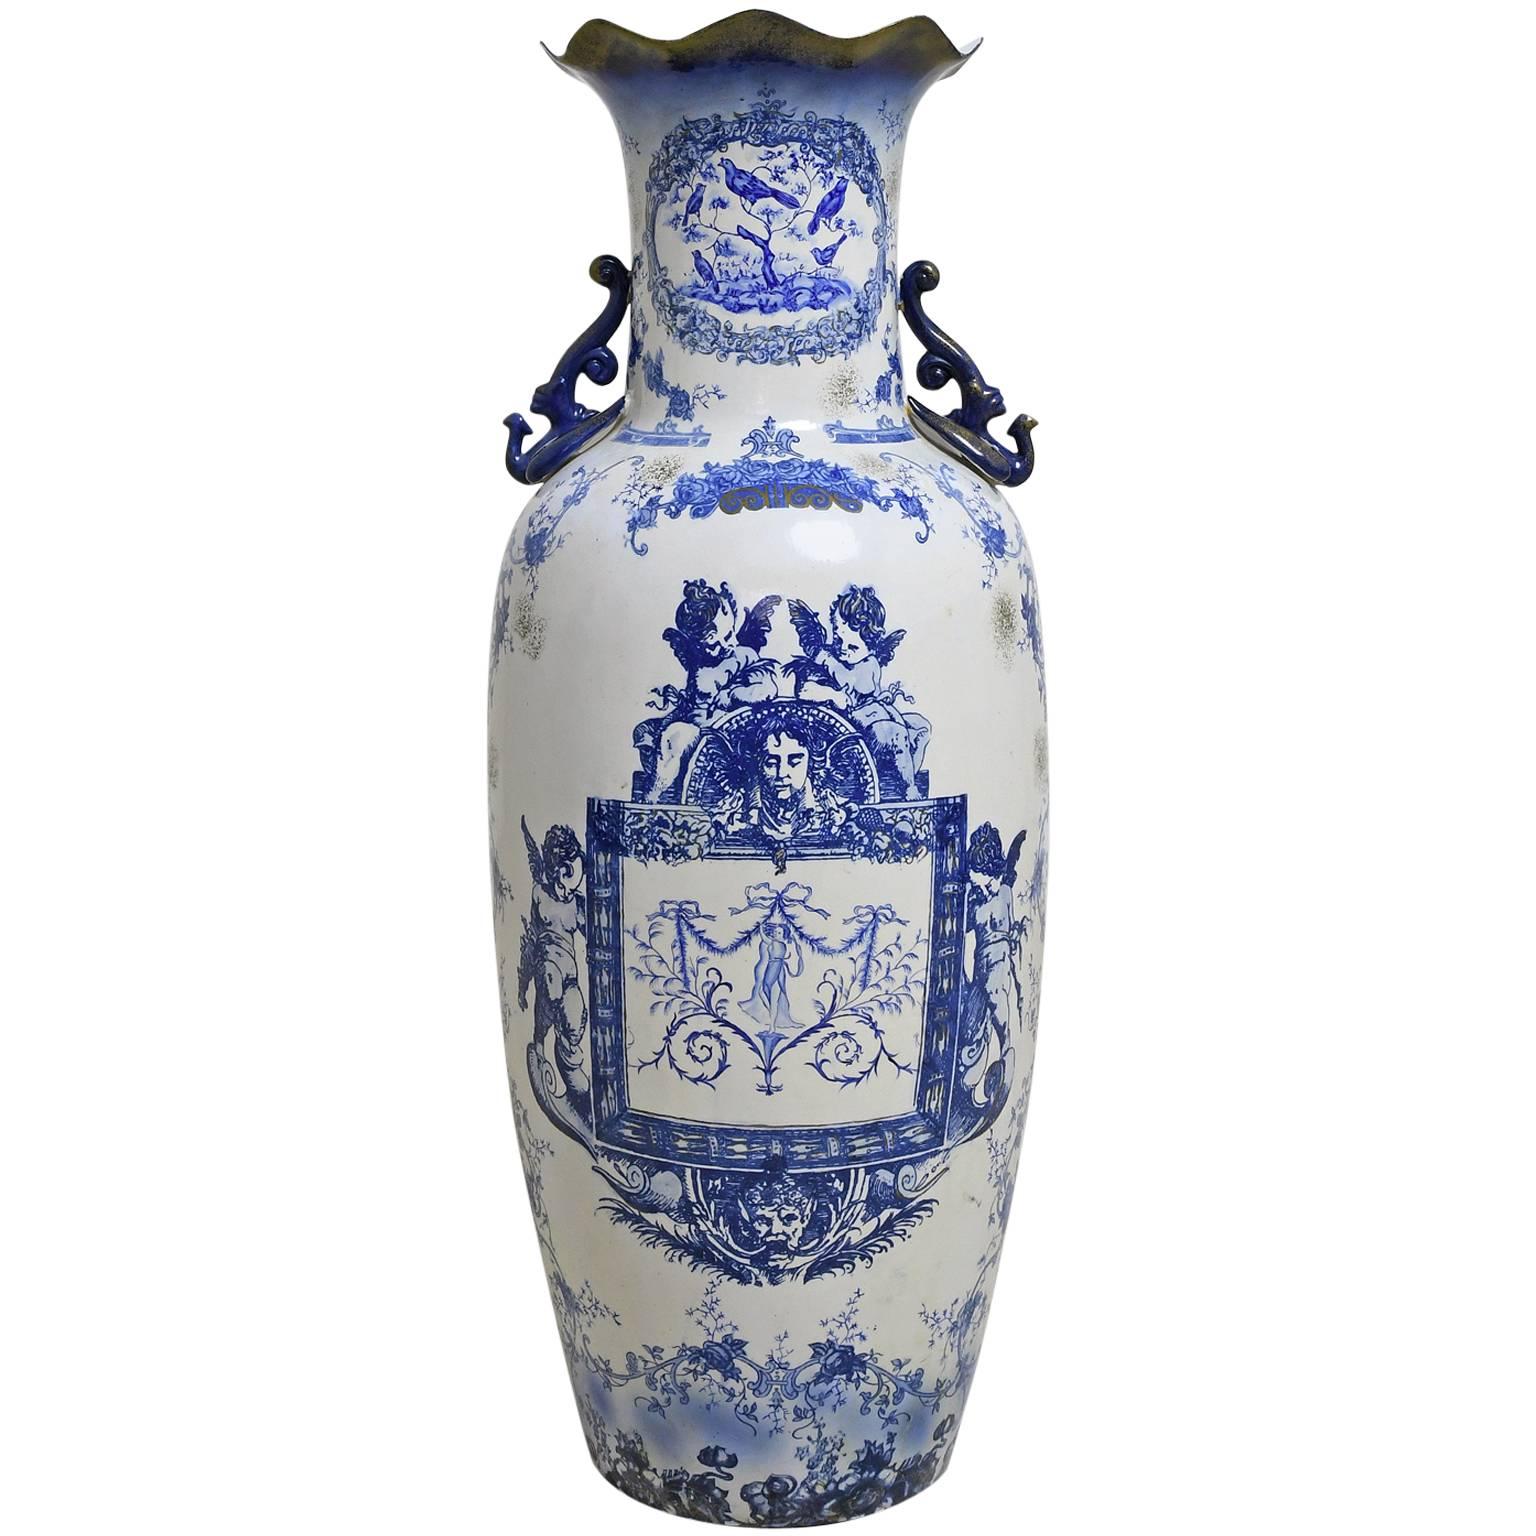 20th Century Decorative Blue and White Chinese Porcelain Export Urn